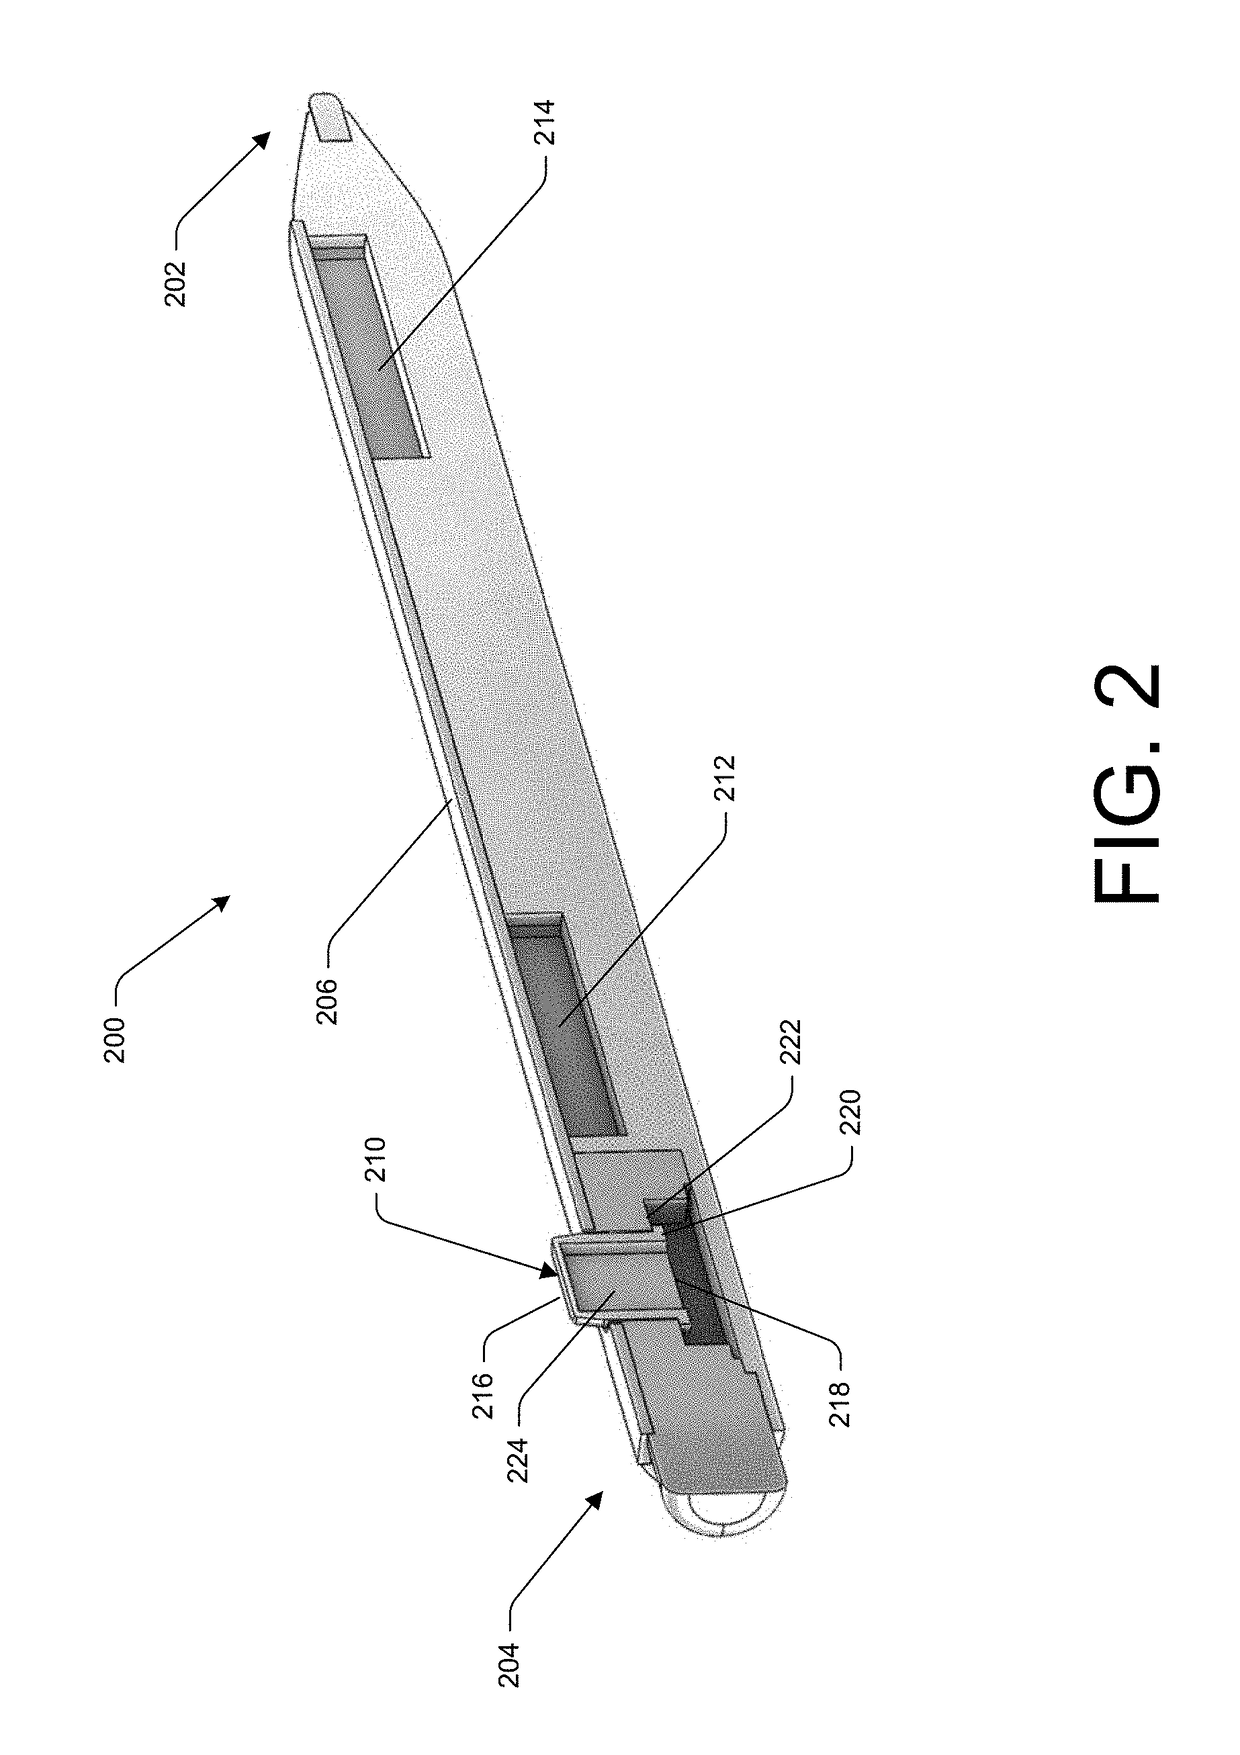 Retractable fang attachment for stylus